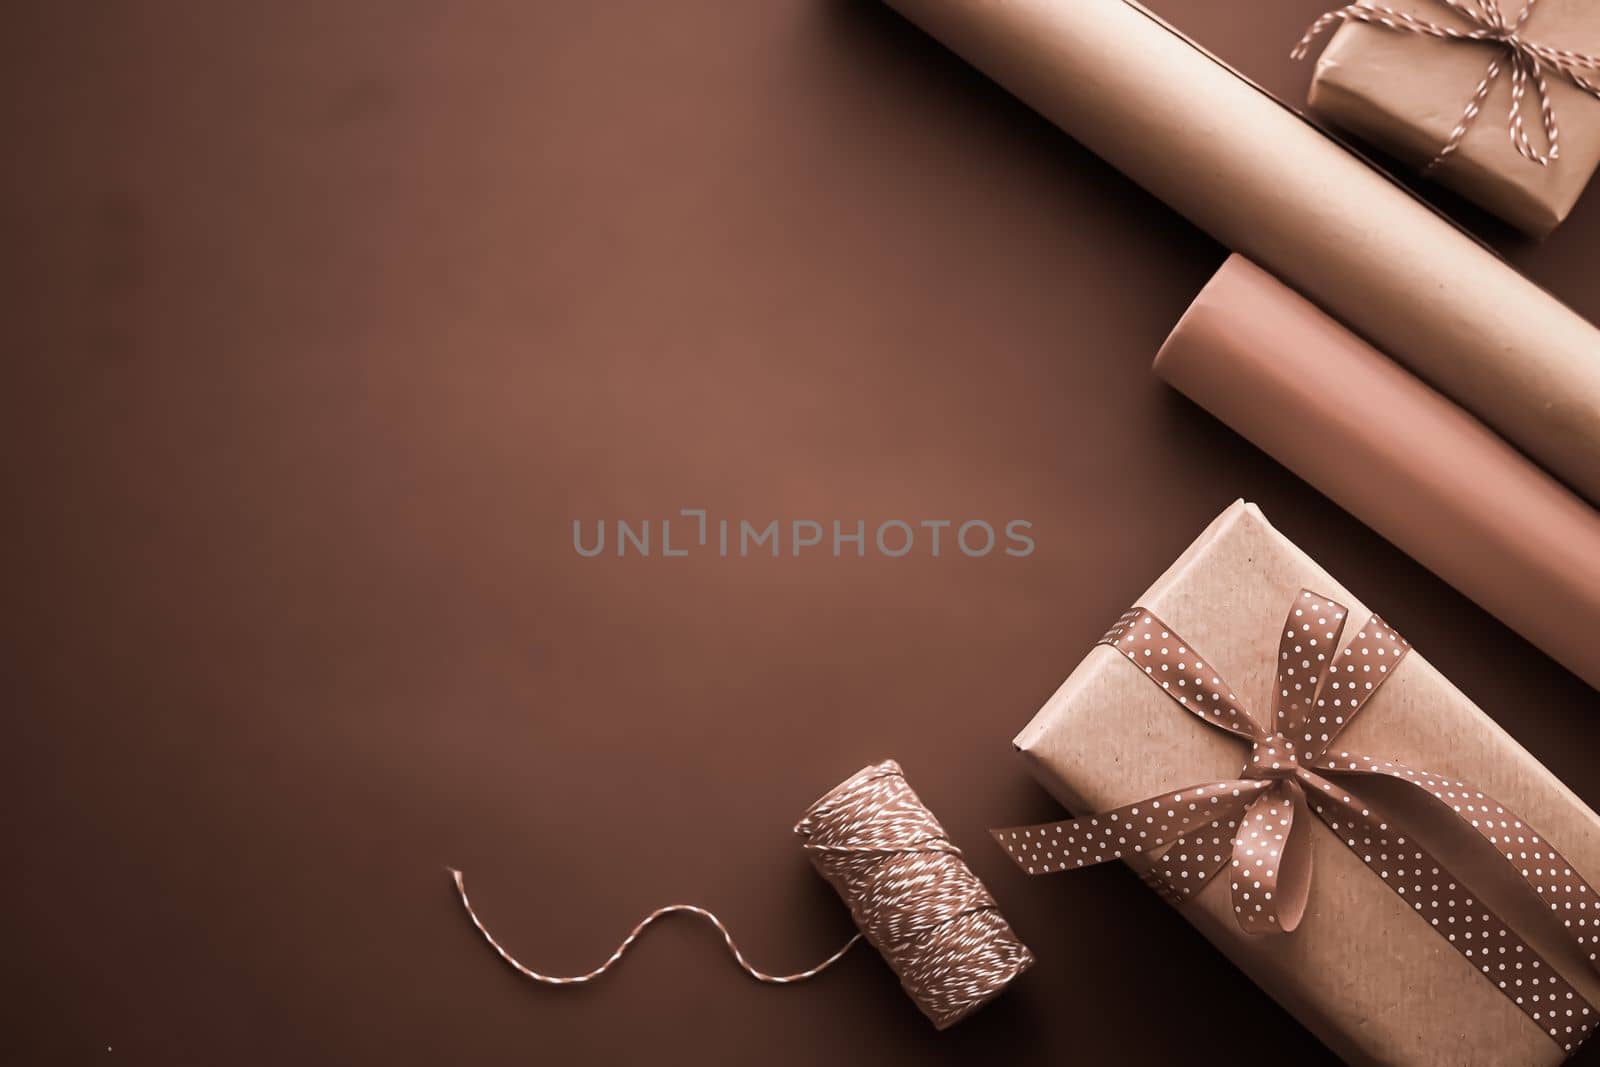 Gifts preparation, birthday and holidays gift giving, craft paper and ribbons for gift boxes on chocolate background as wrapping tools and decorations, diy presents as holiday flat lay design by Anneleven